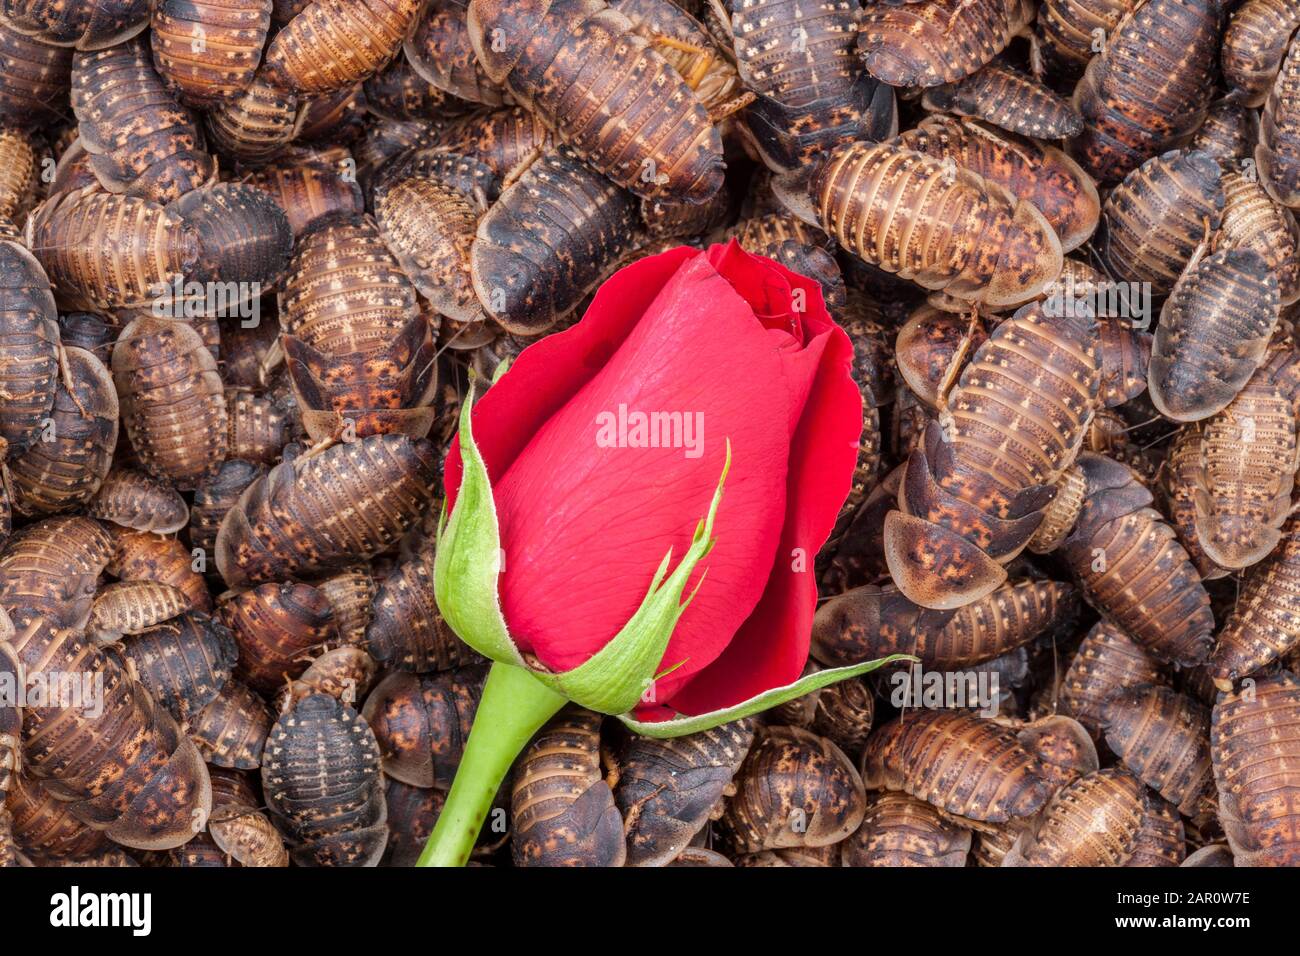 Single RED ROSE surrounded by orange spotted roaches (Blaptica dubia). Stock Photo